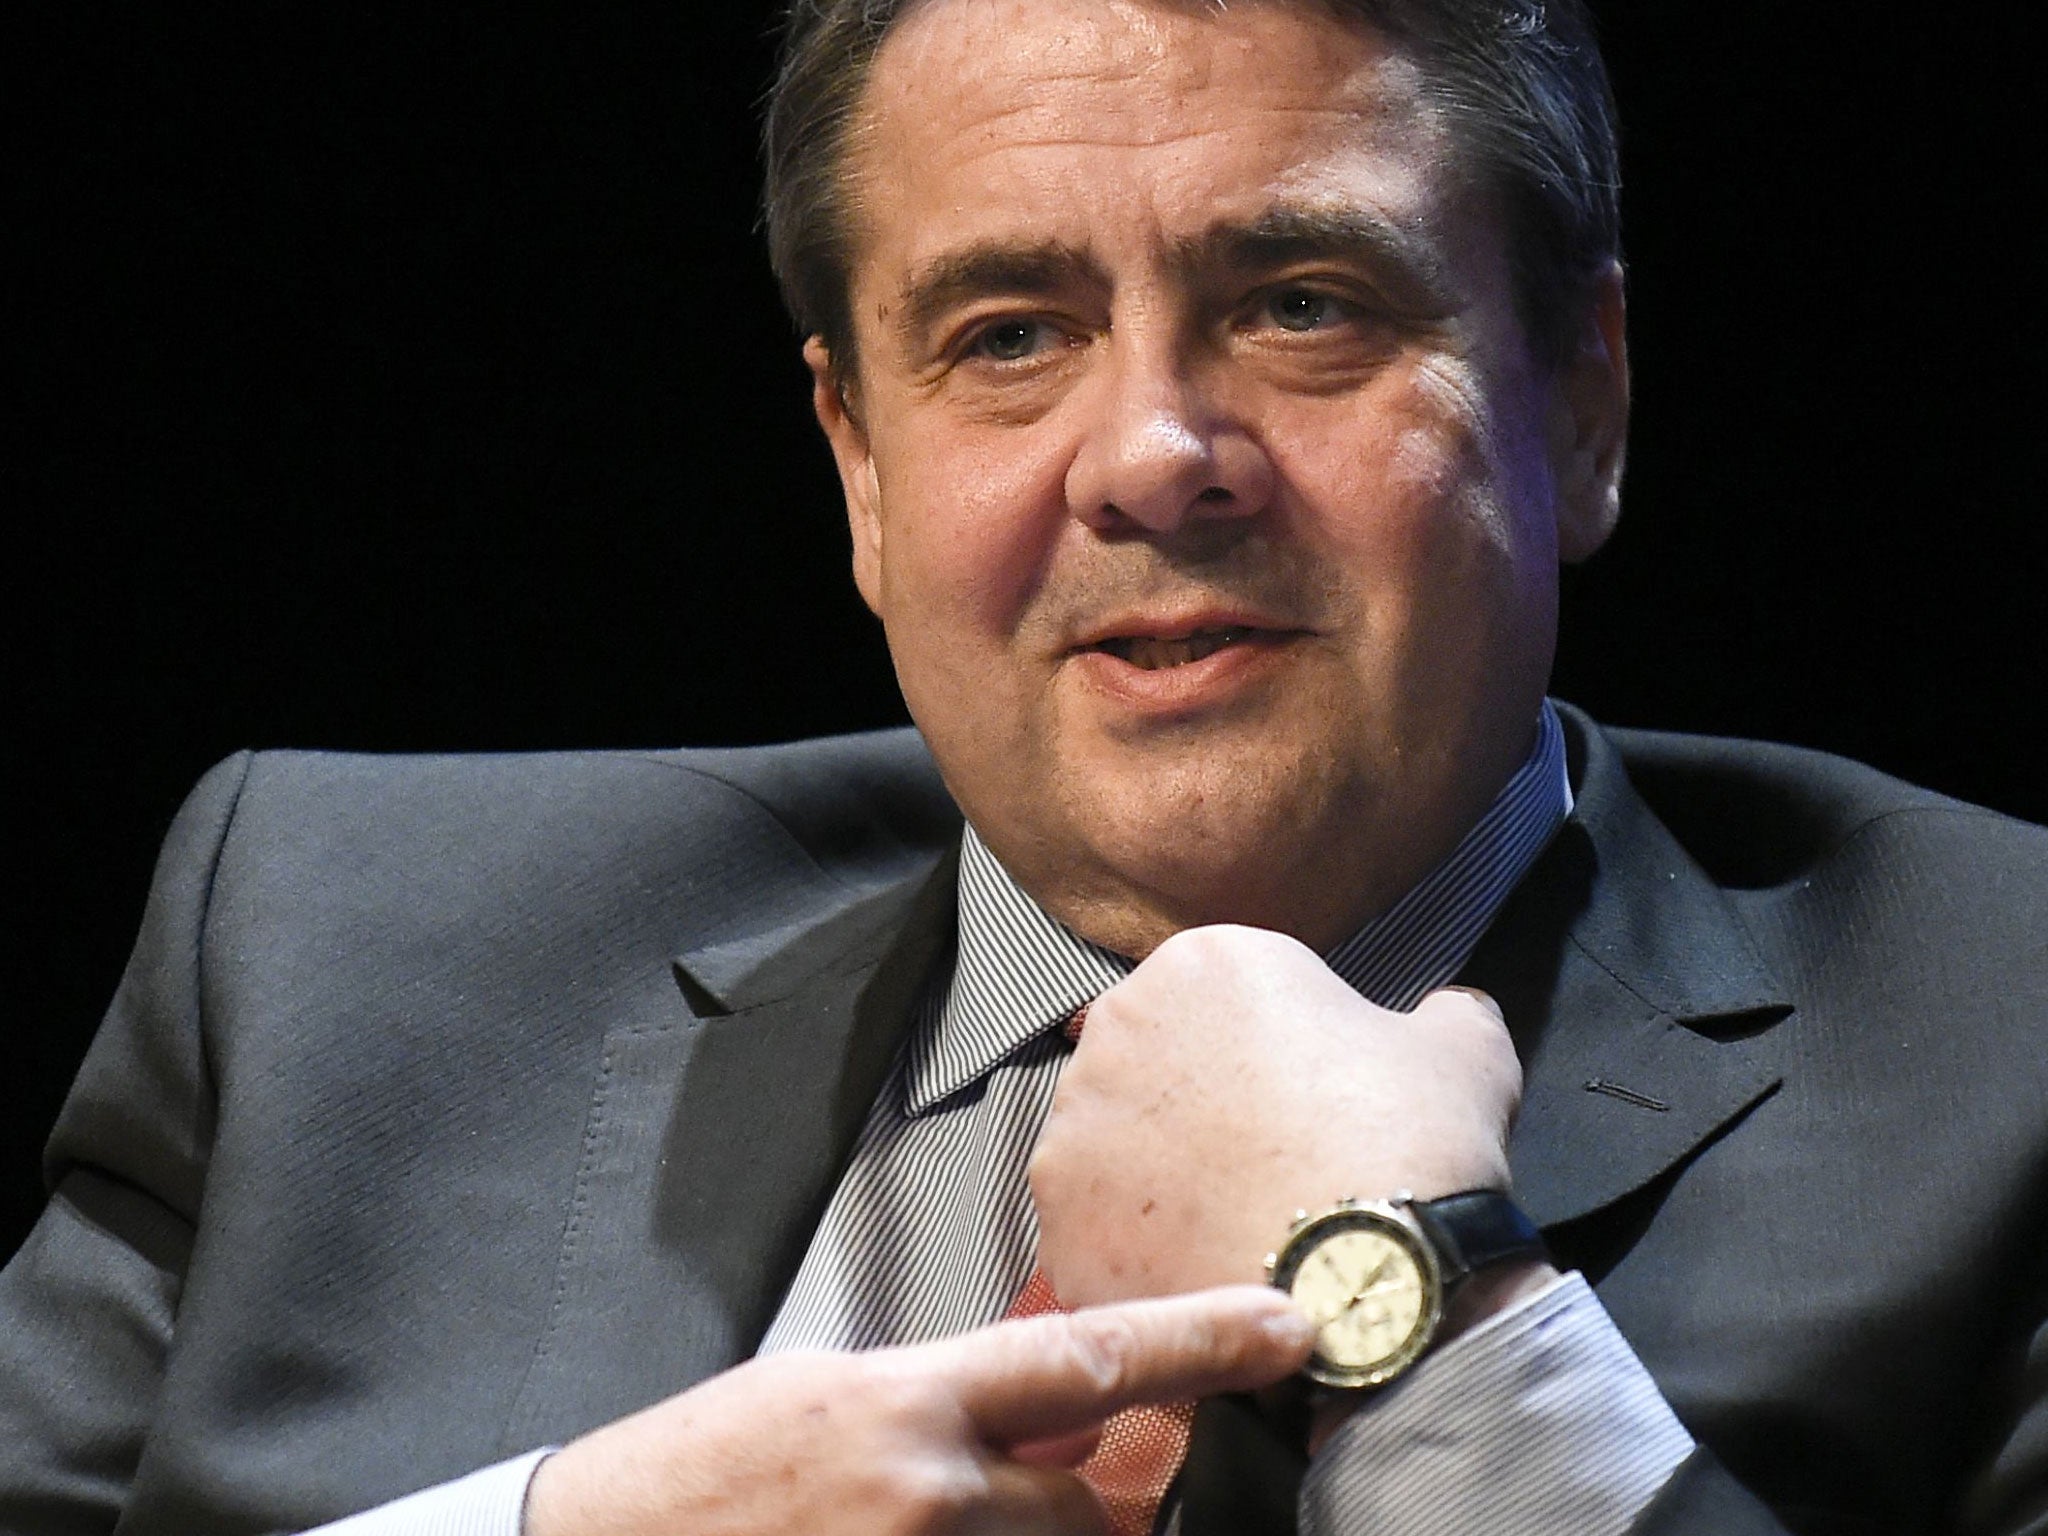 German Foreign Minister Sigmar Gabriel speaks during a public debate on the future of Europe on 3 April